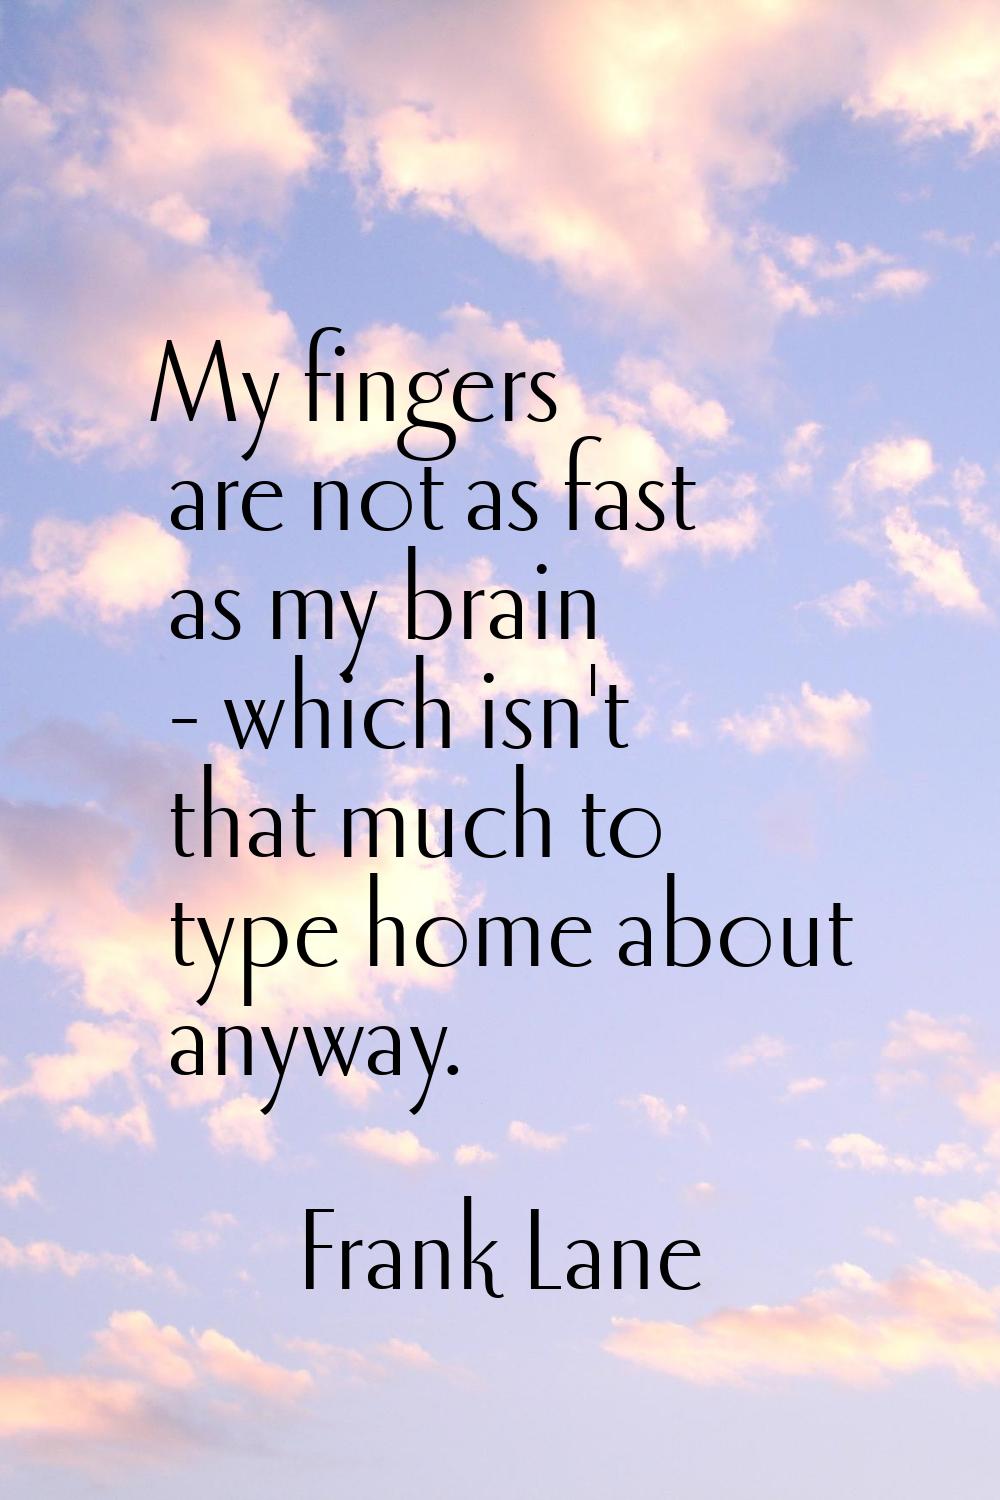 My fingers are not as fast as my brain - which isn't that much to type home about anyway.